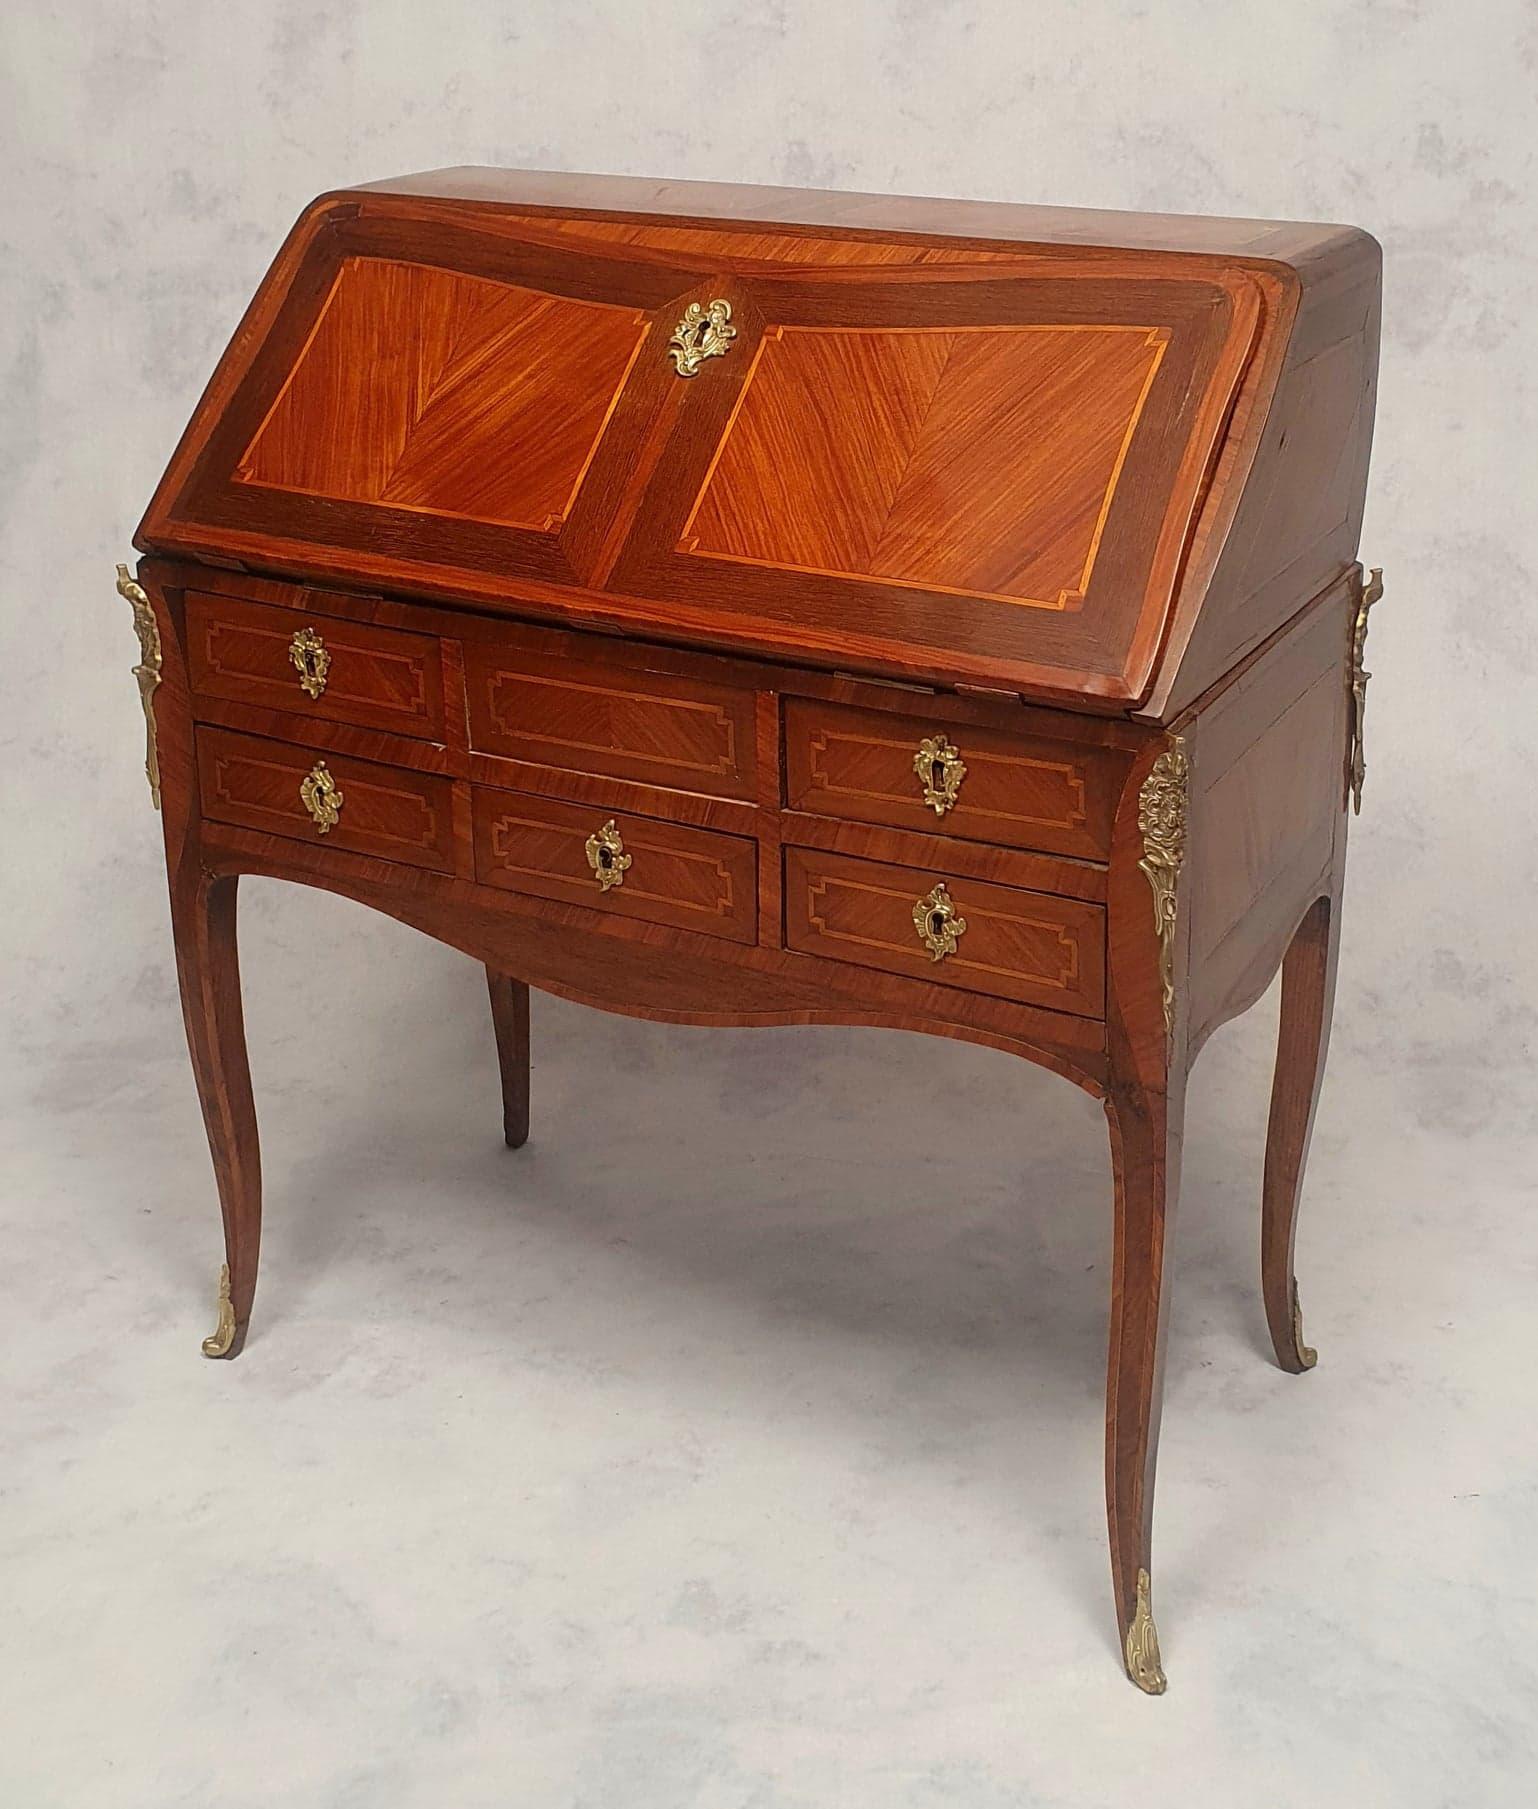 French Secretary Period Transition Louis XV, Louis XVI, Palissander & Rosewood, 18th For Sale